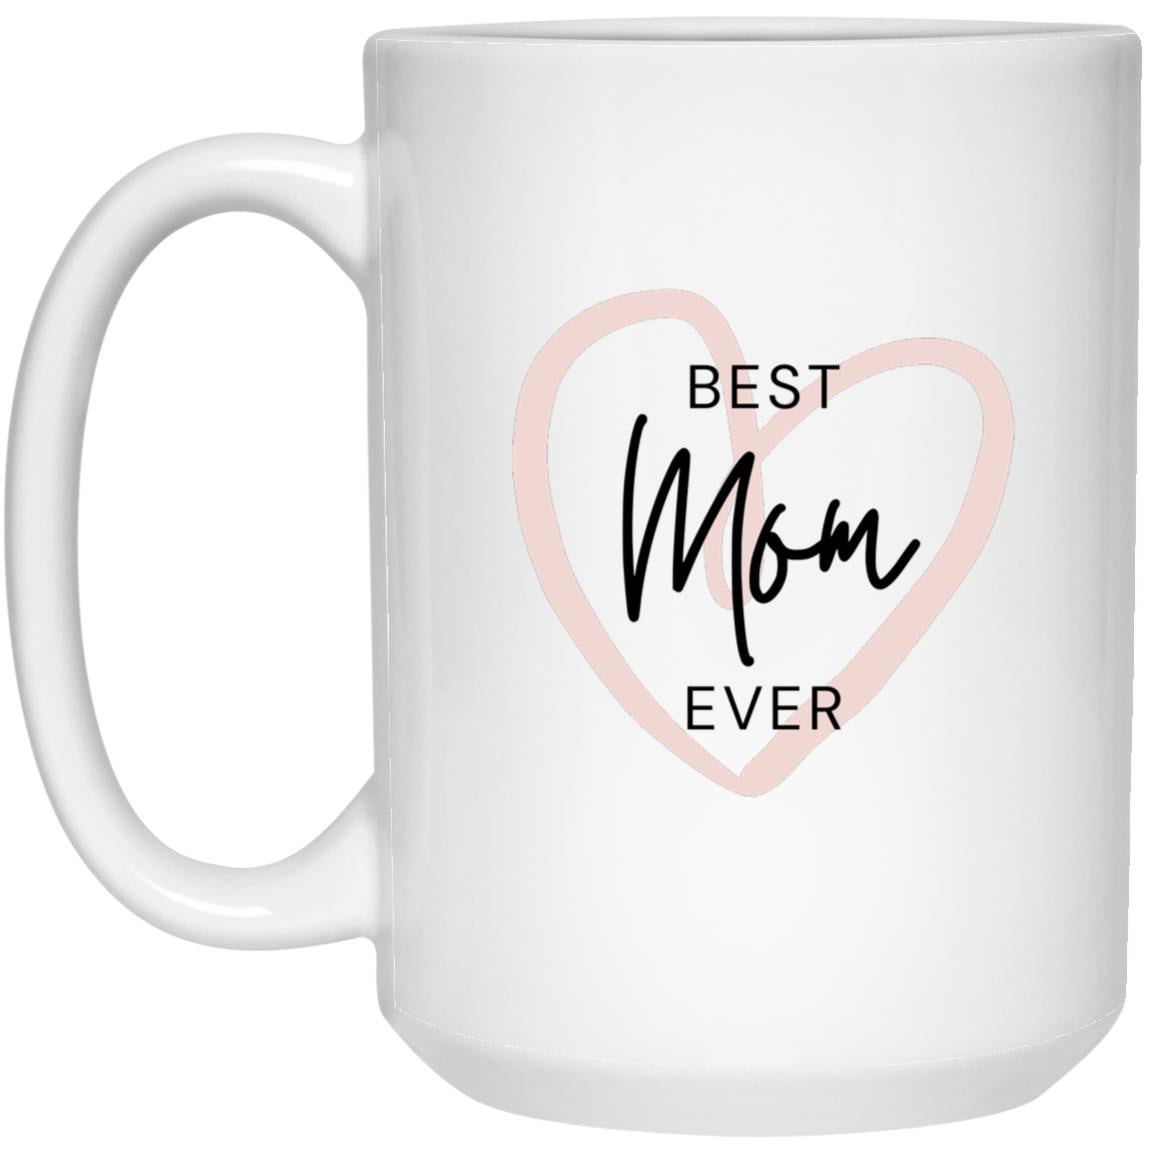 Best Mom Ever Mug| For Mother's Day| Mom Gift From Kids| Mom Birthday Gift| Present for Mom